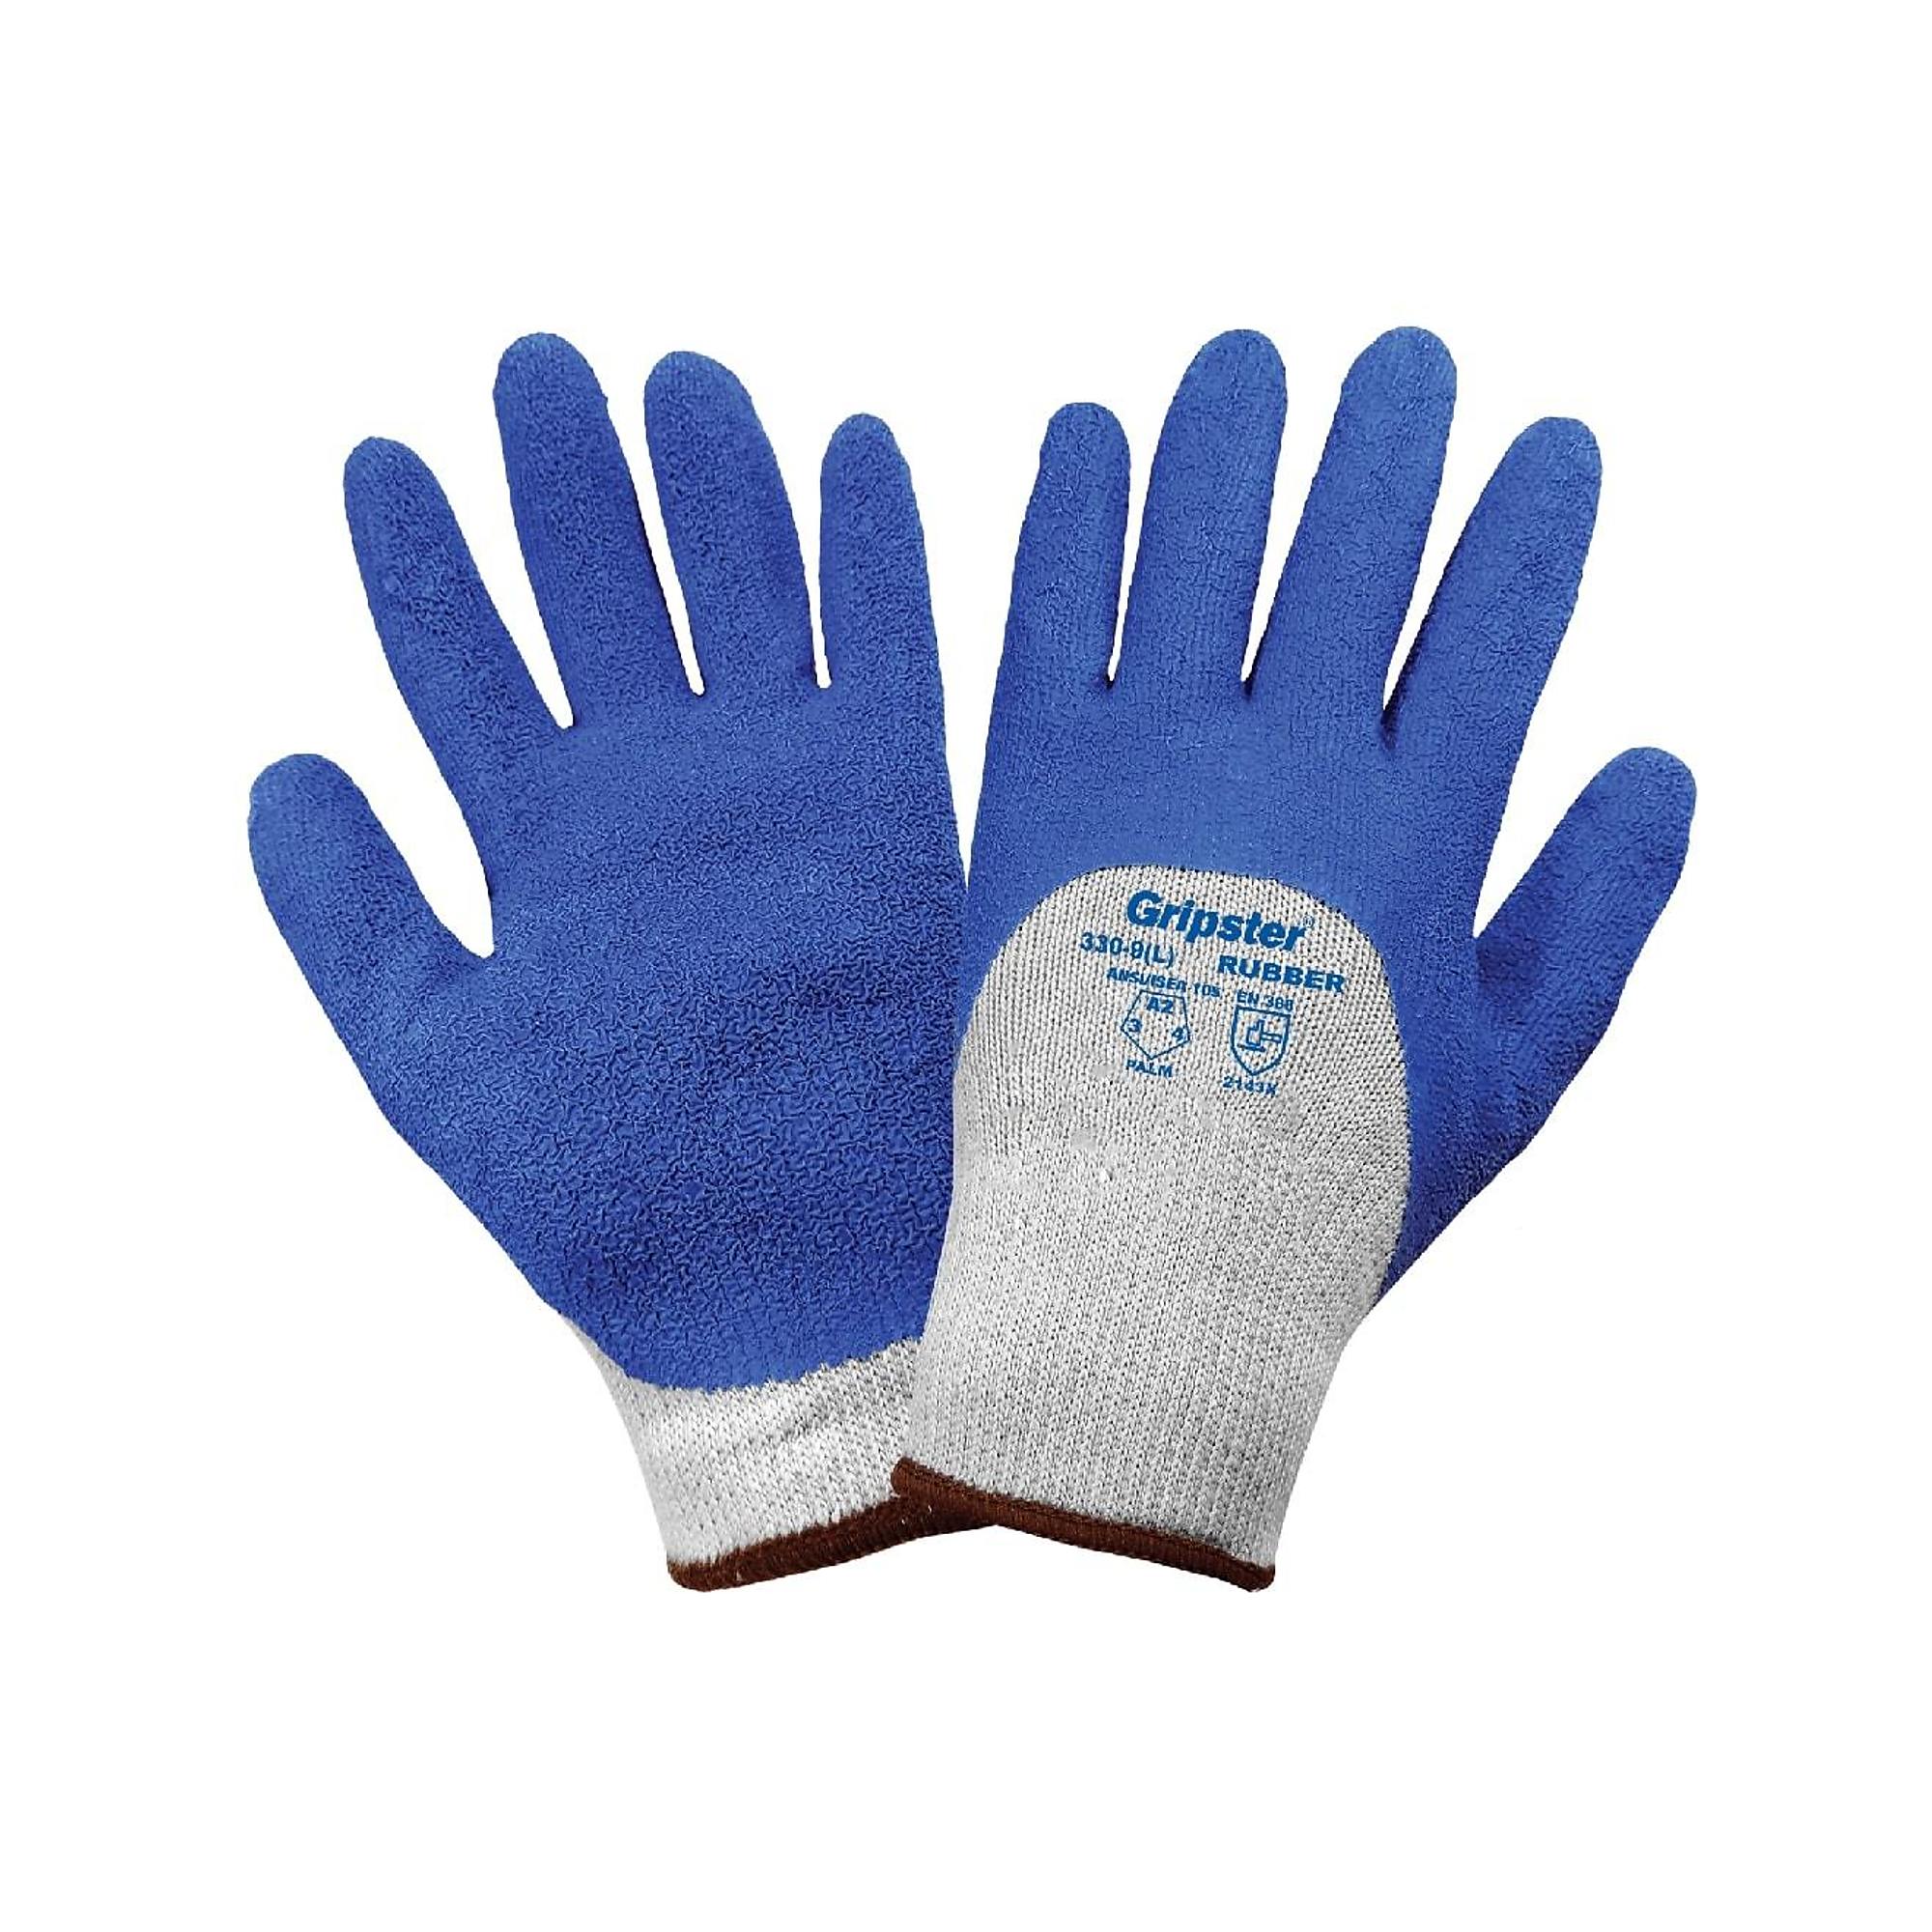 Global Glove Gripster , Gray, Blue 3/4 Rub Dip, Cut Resistant A2 Gloves - 12 Pairs, Size XL, Color Gray/Blue, Included (qty.) 12 Model 330-10(XL)